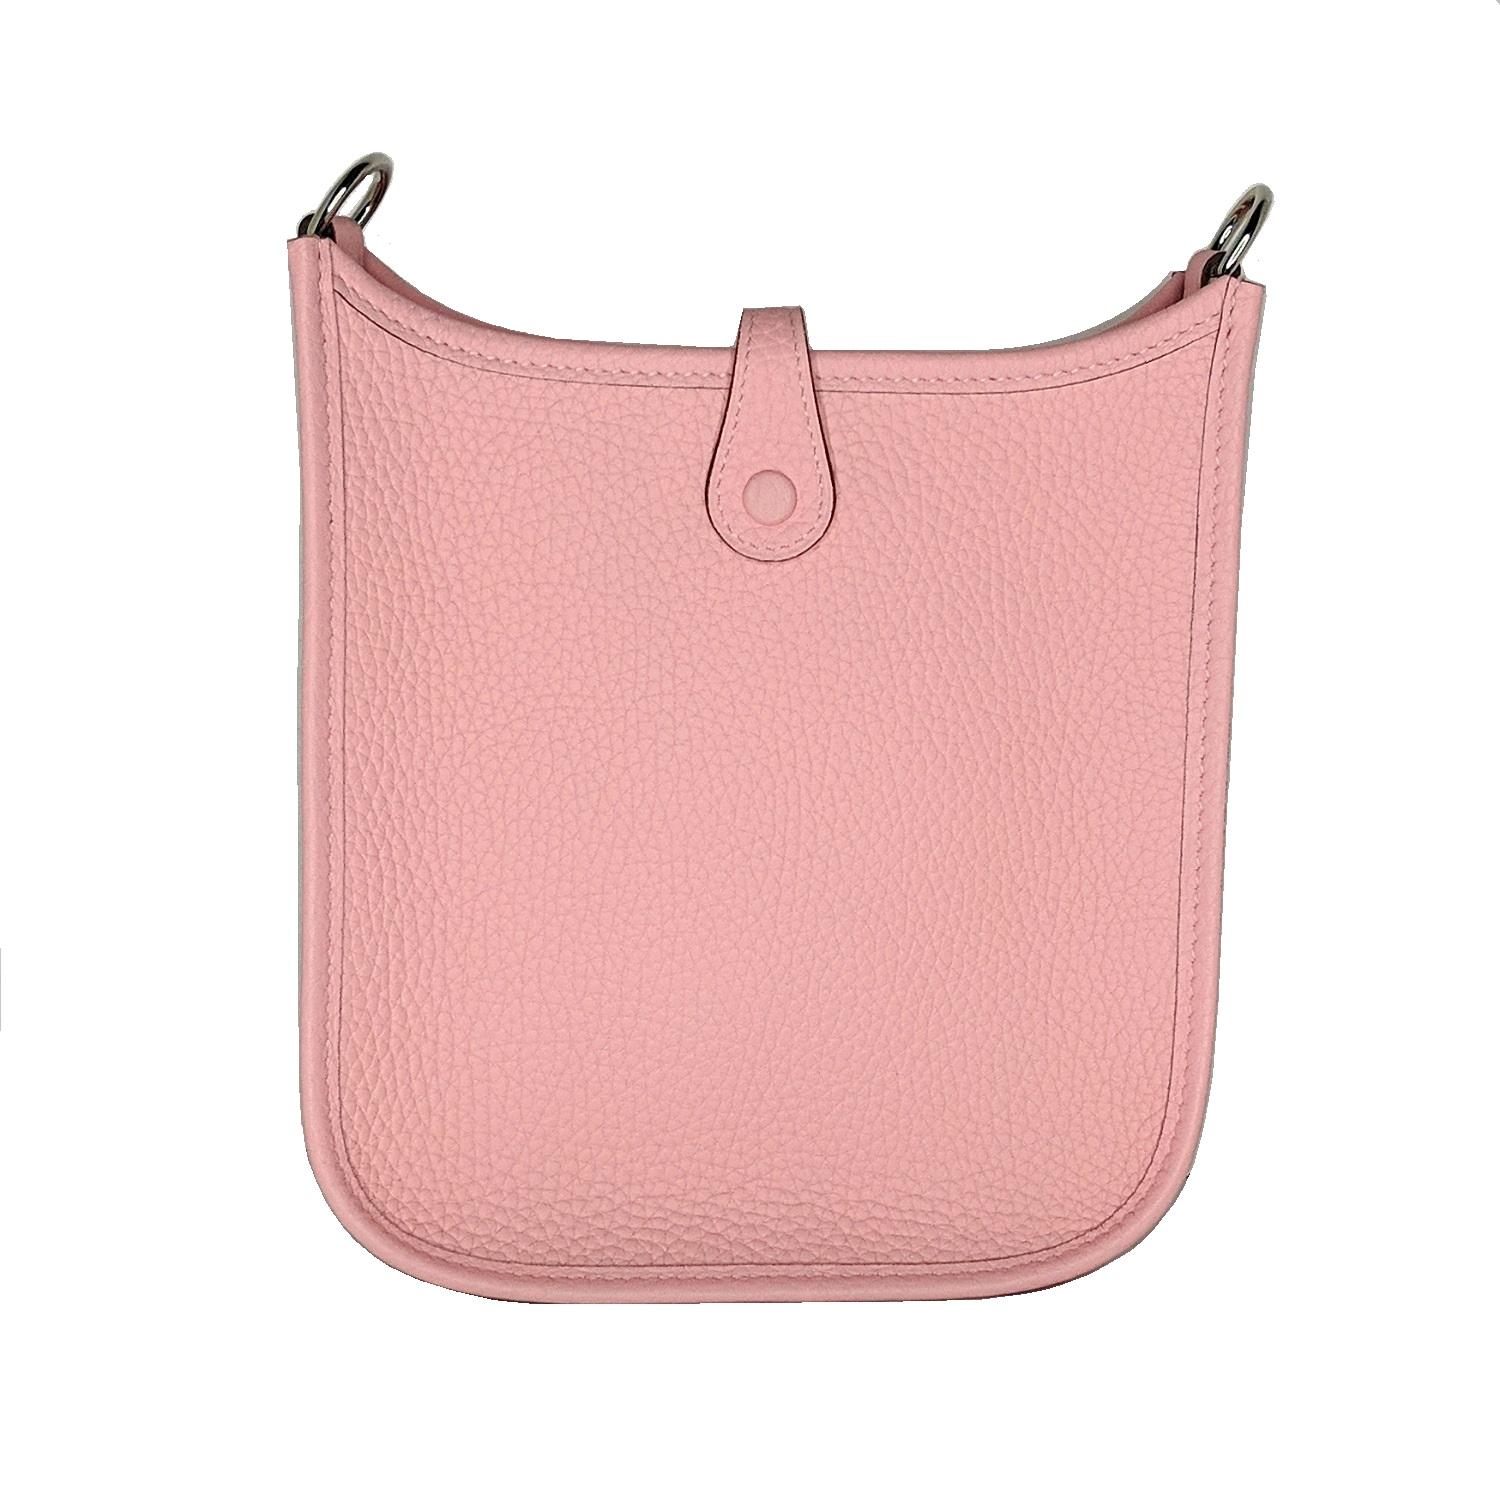 This stylish smaller messenger bag is crafted of textured Taurillon Clemence calfskin leather in pink. It features a perforated Hermes H oval at the front and a canvas crossbody strap with palladium hardware. The top opens with a crossover strap to